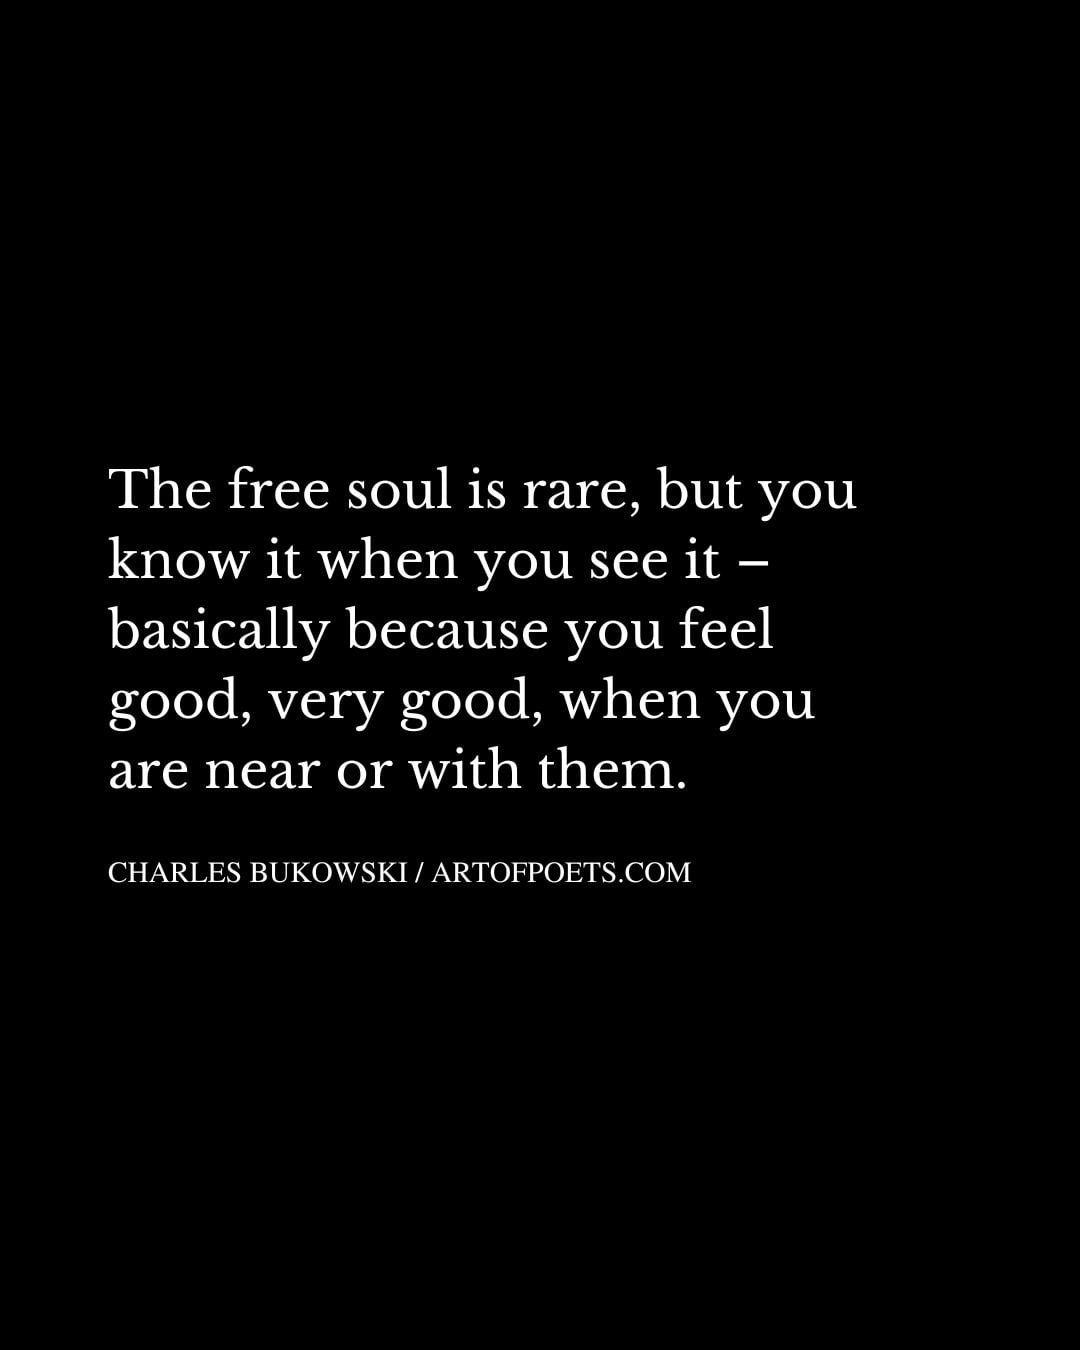 The free soul is rare but you know it when you see it – basically because you feel good very good when you are near or with them